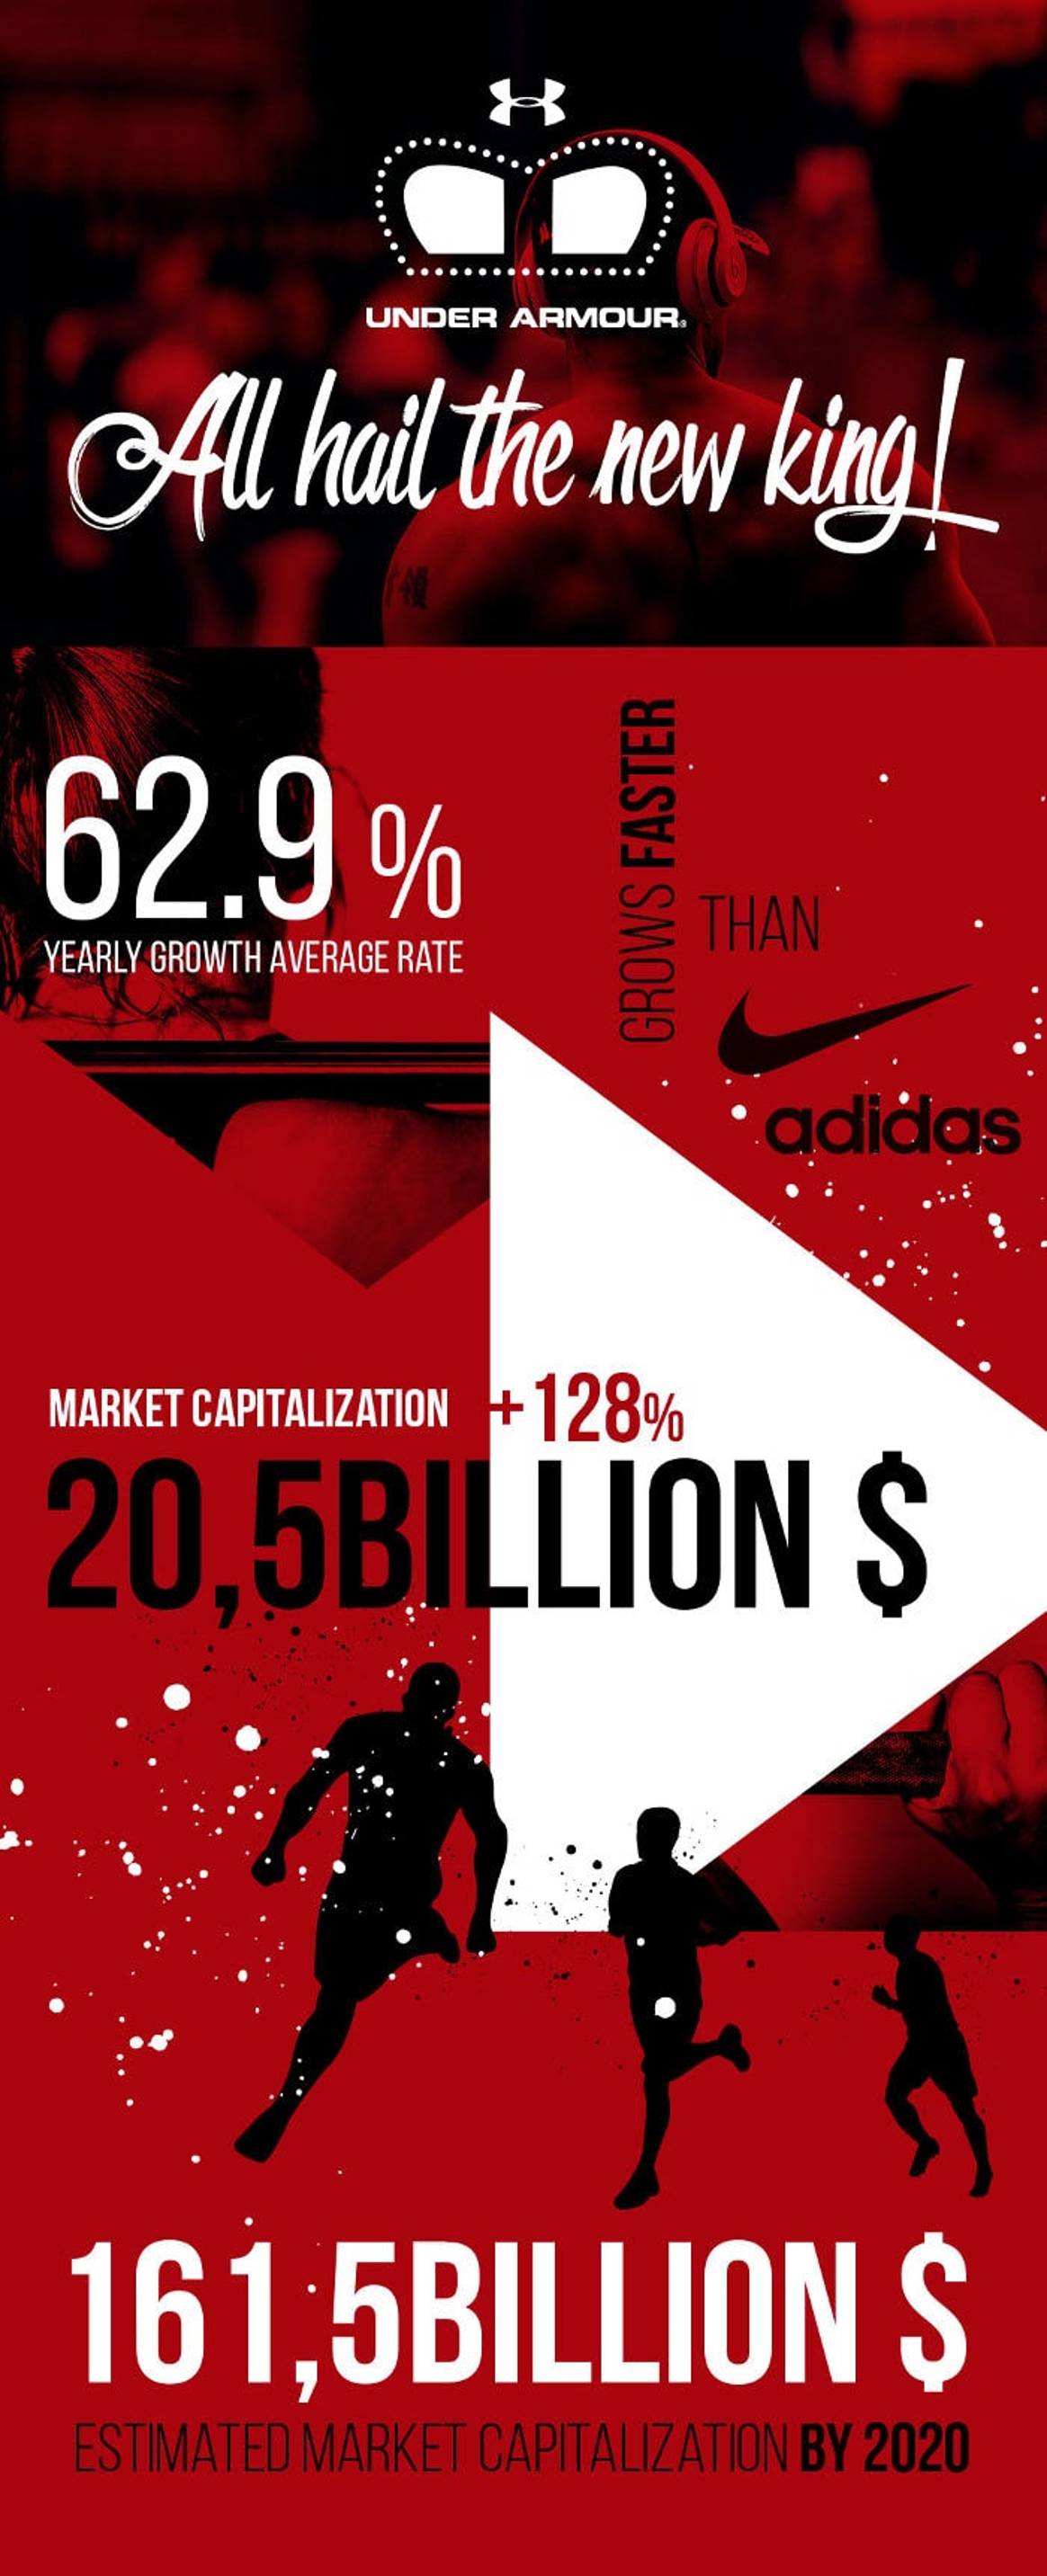 Infographic - Why Under Armour is surpassing Adidas and catching up to Nike